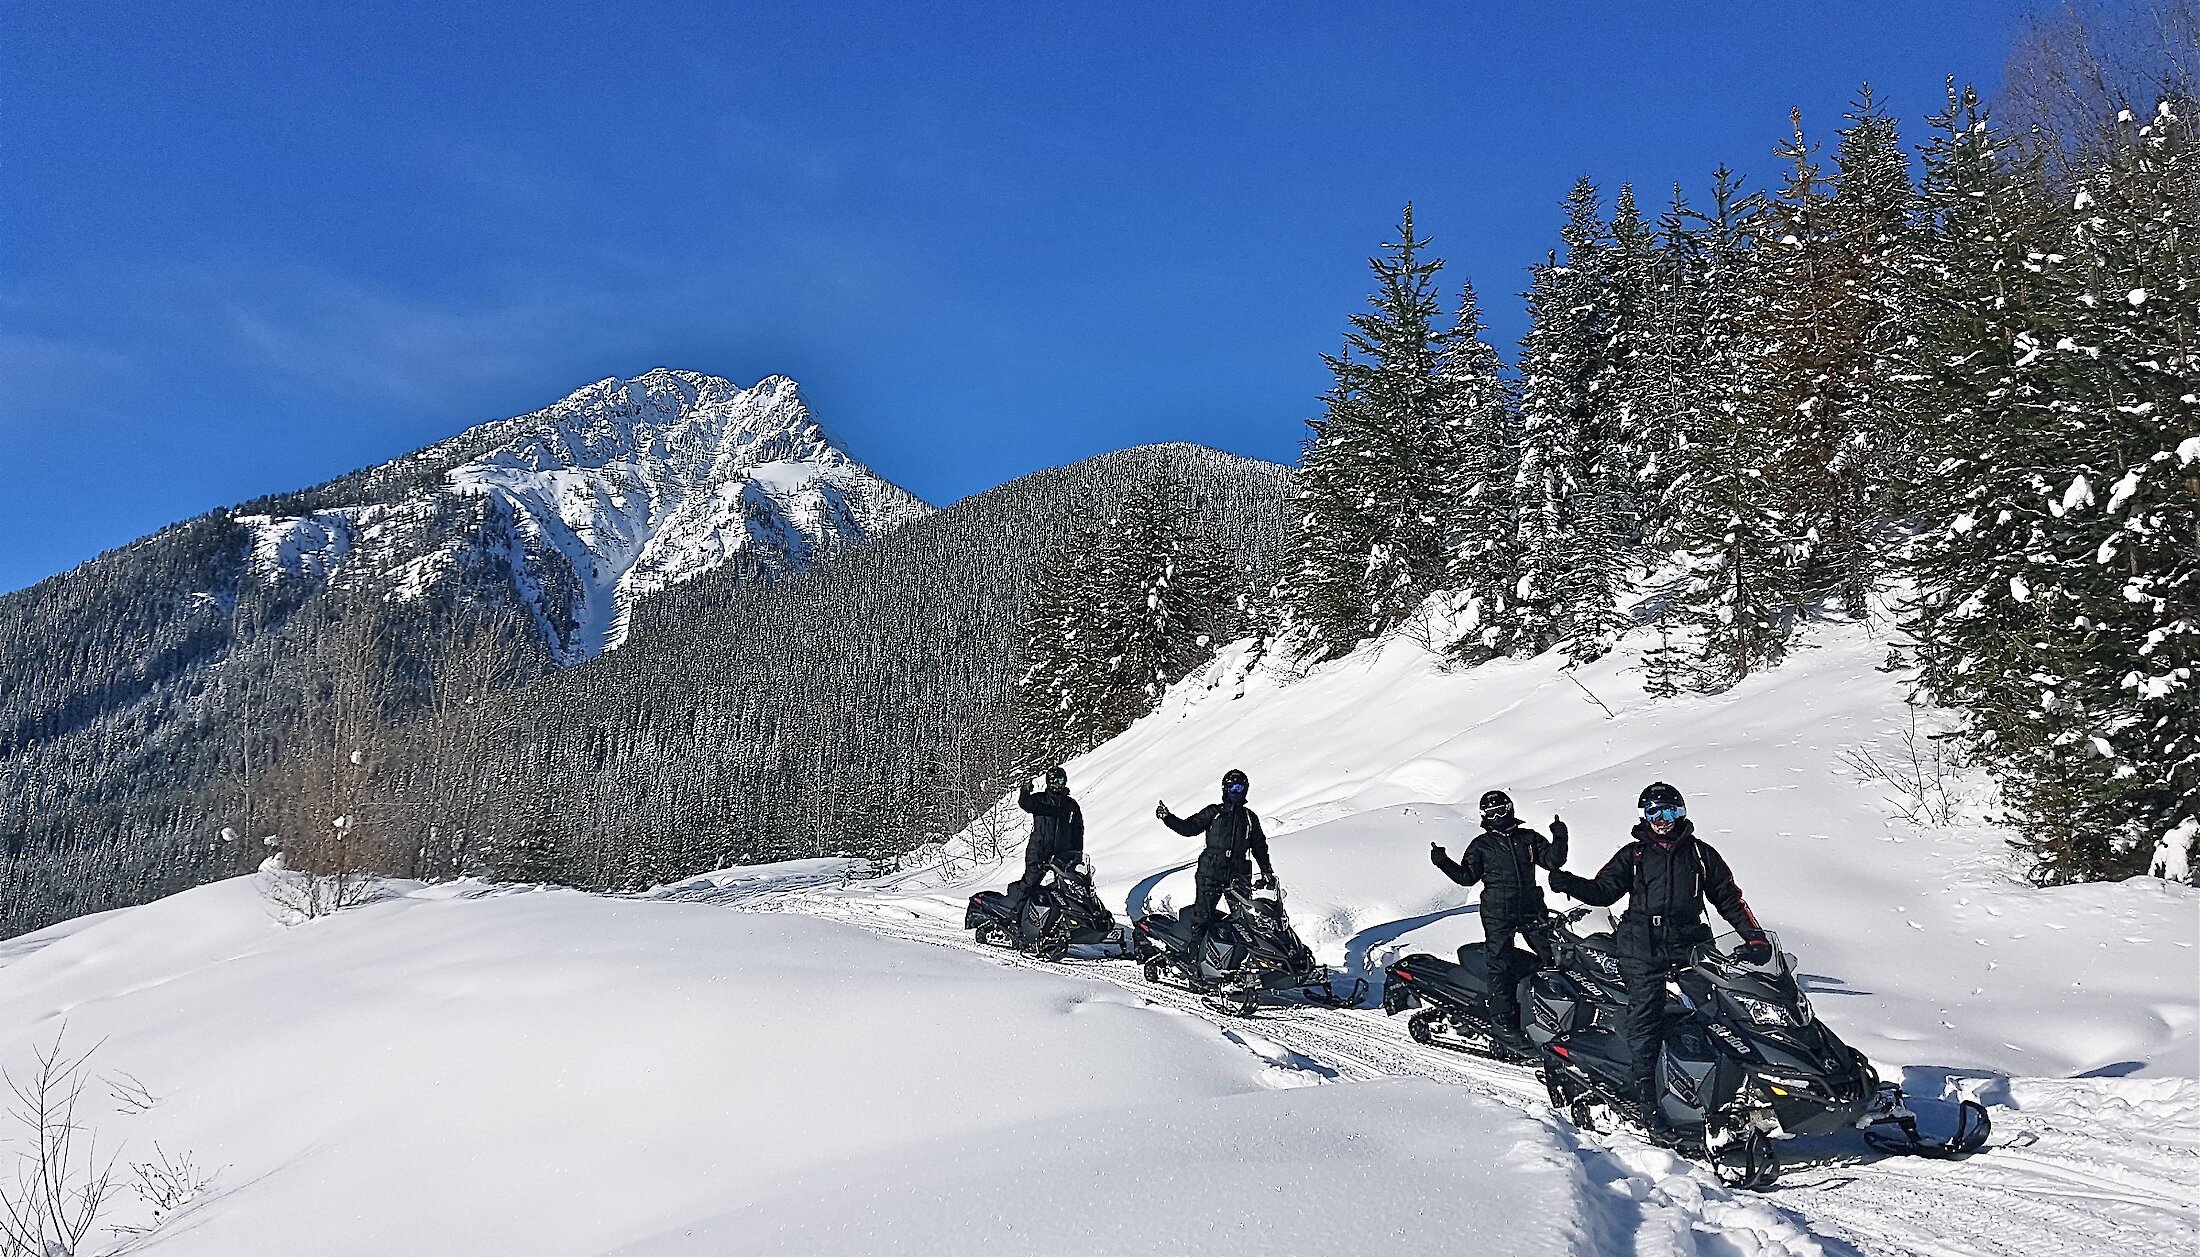 Snowmobilers admiring the stunning views on the Golden Snowmobile Tour